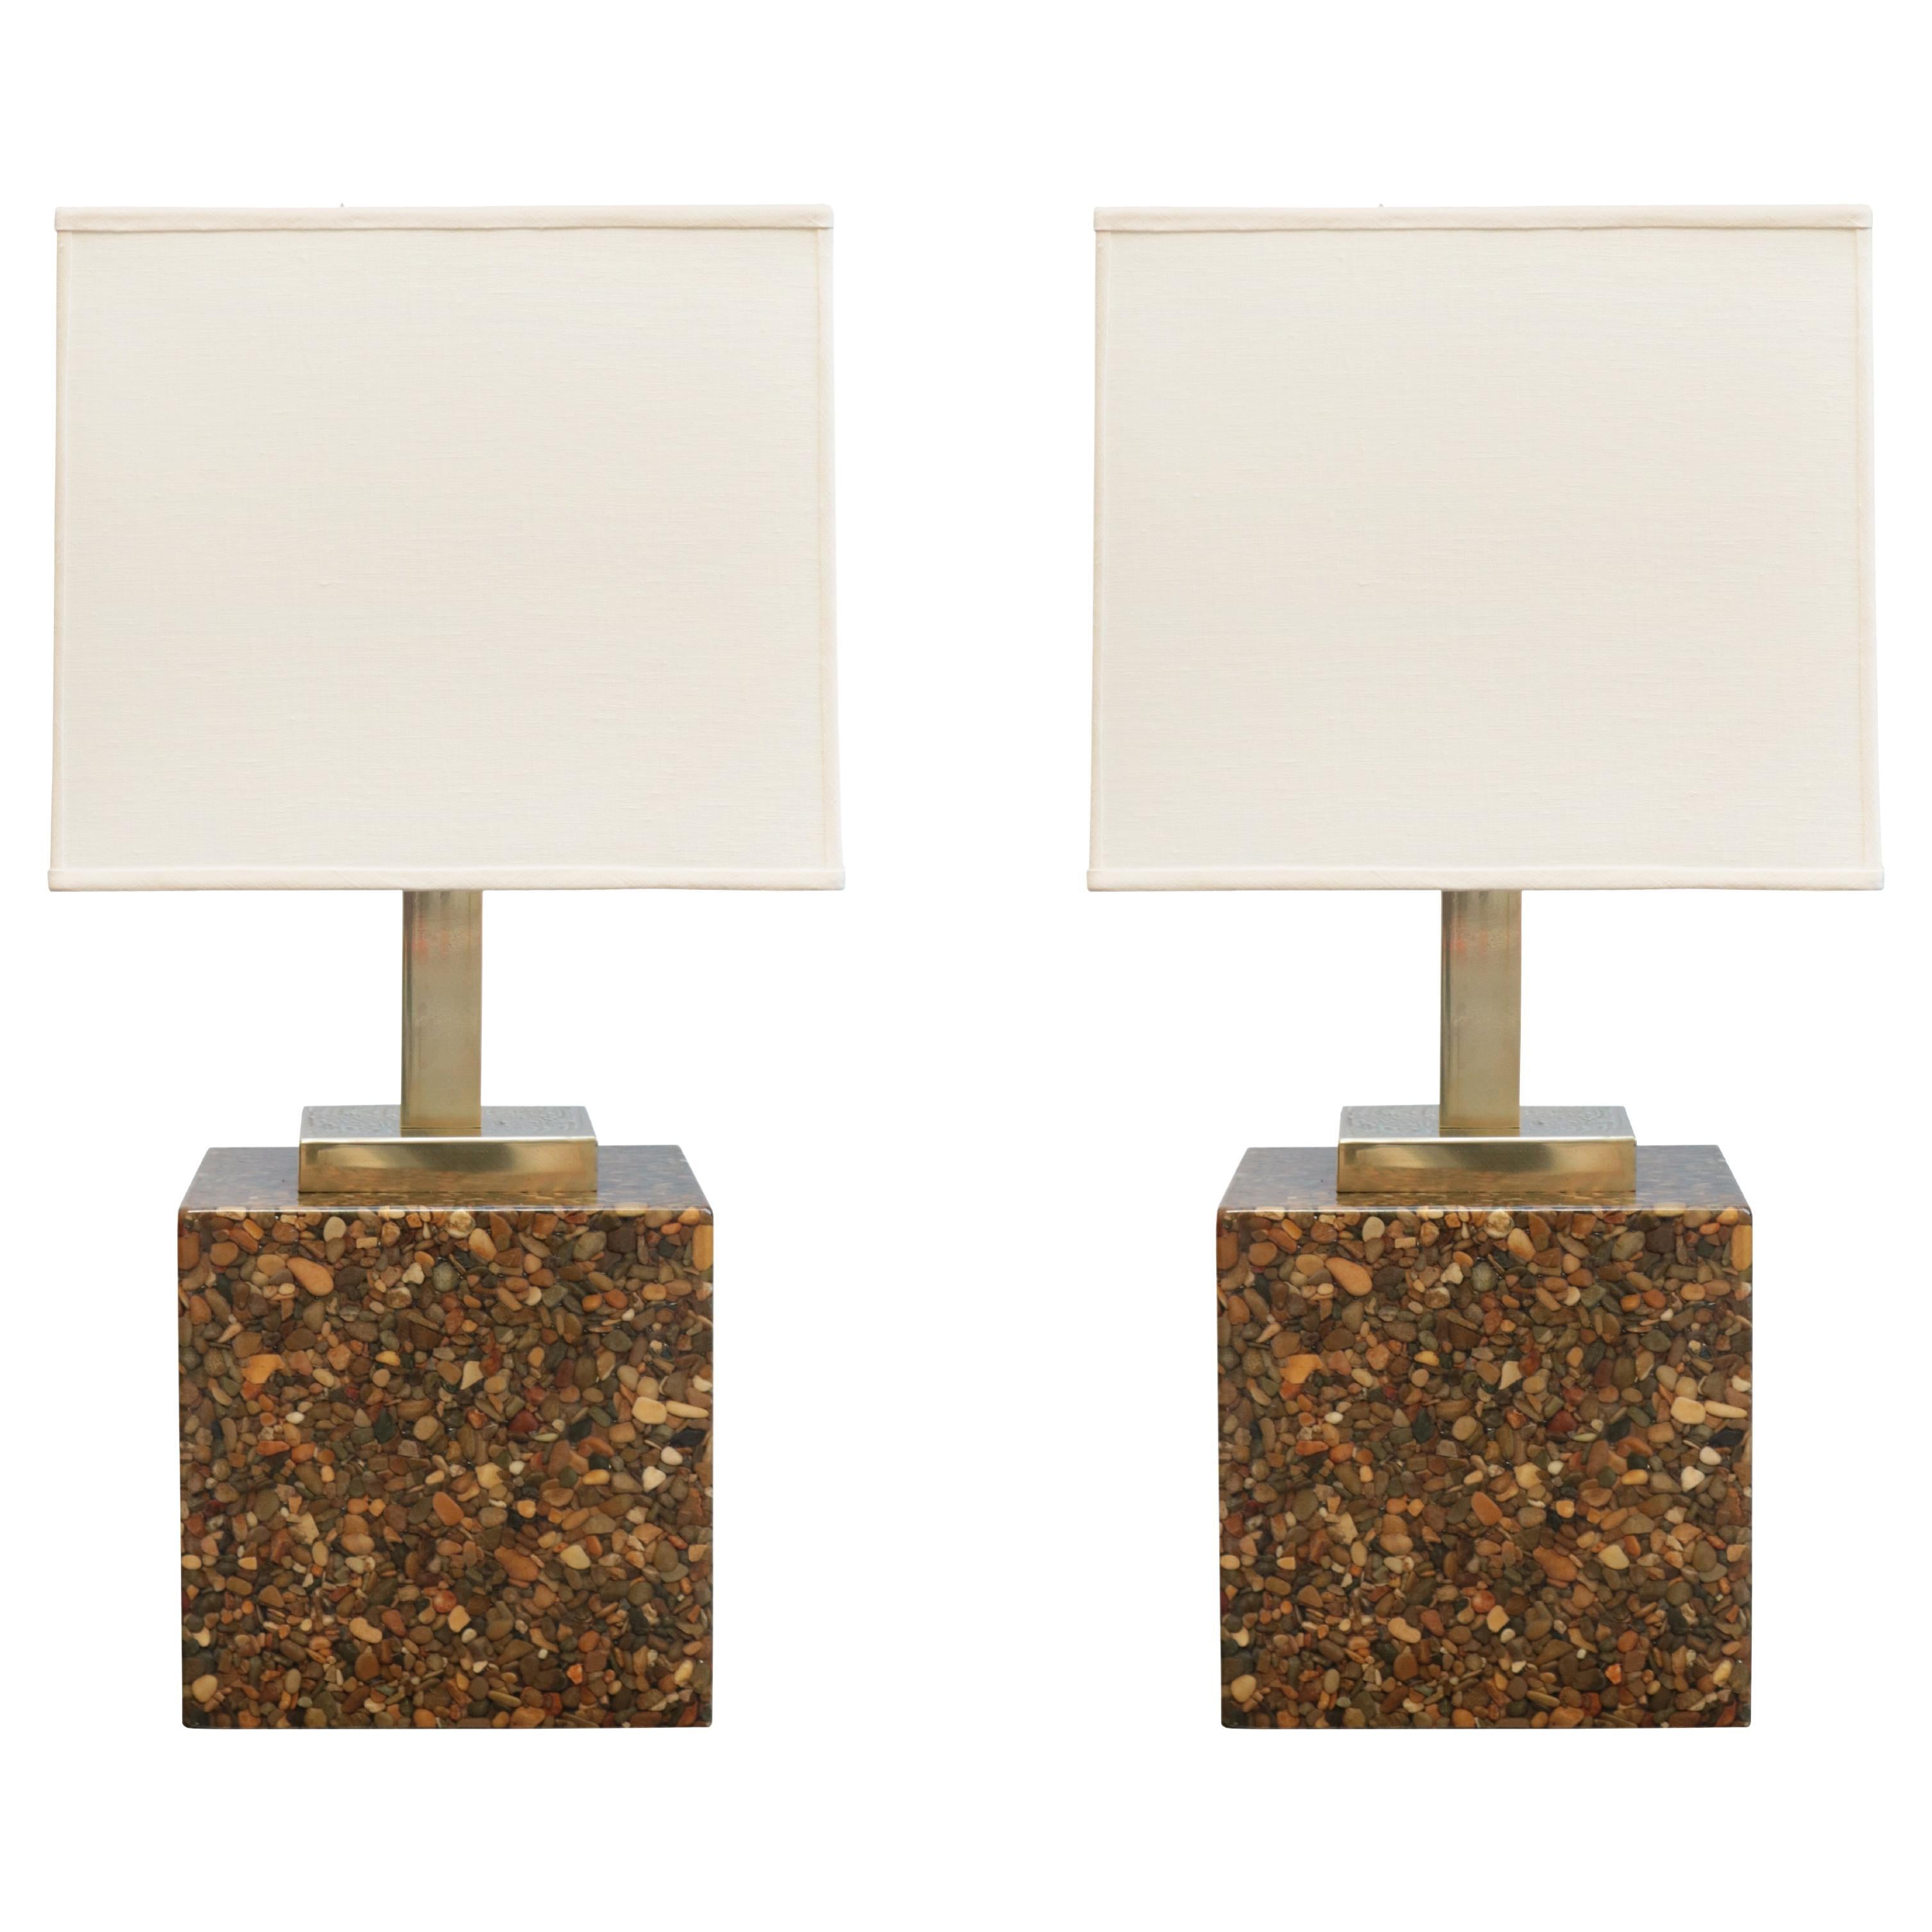 Pair of Modernist Resin and Stone Table Lamps